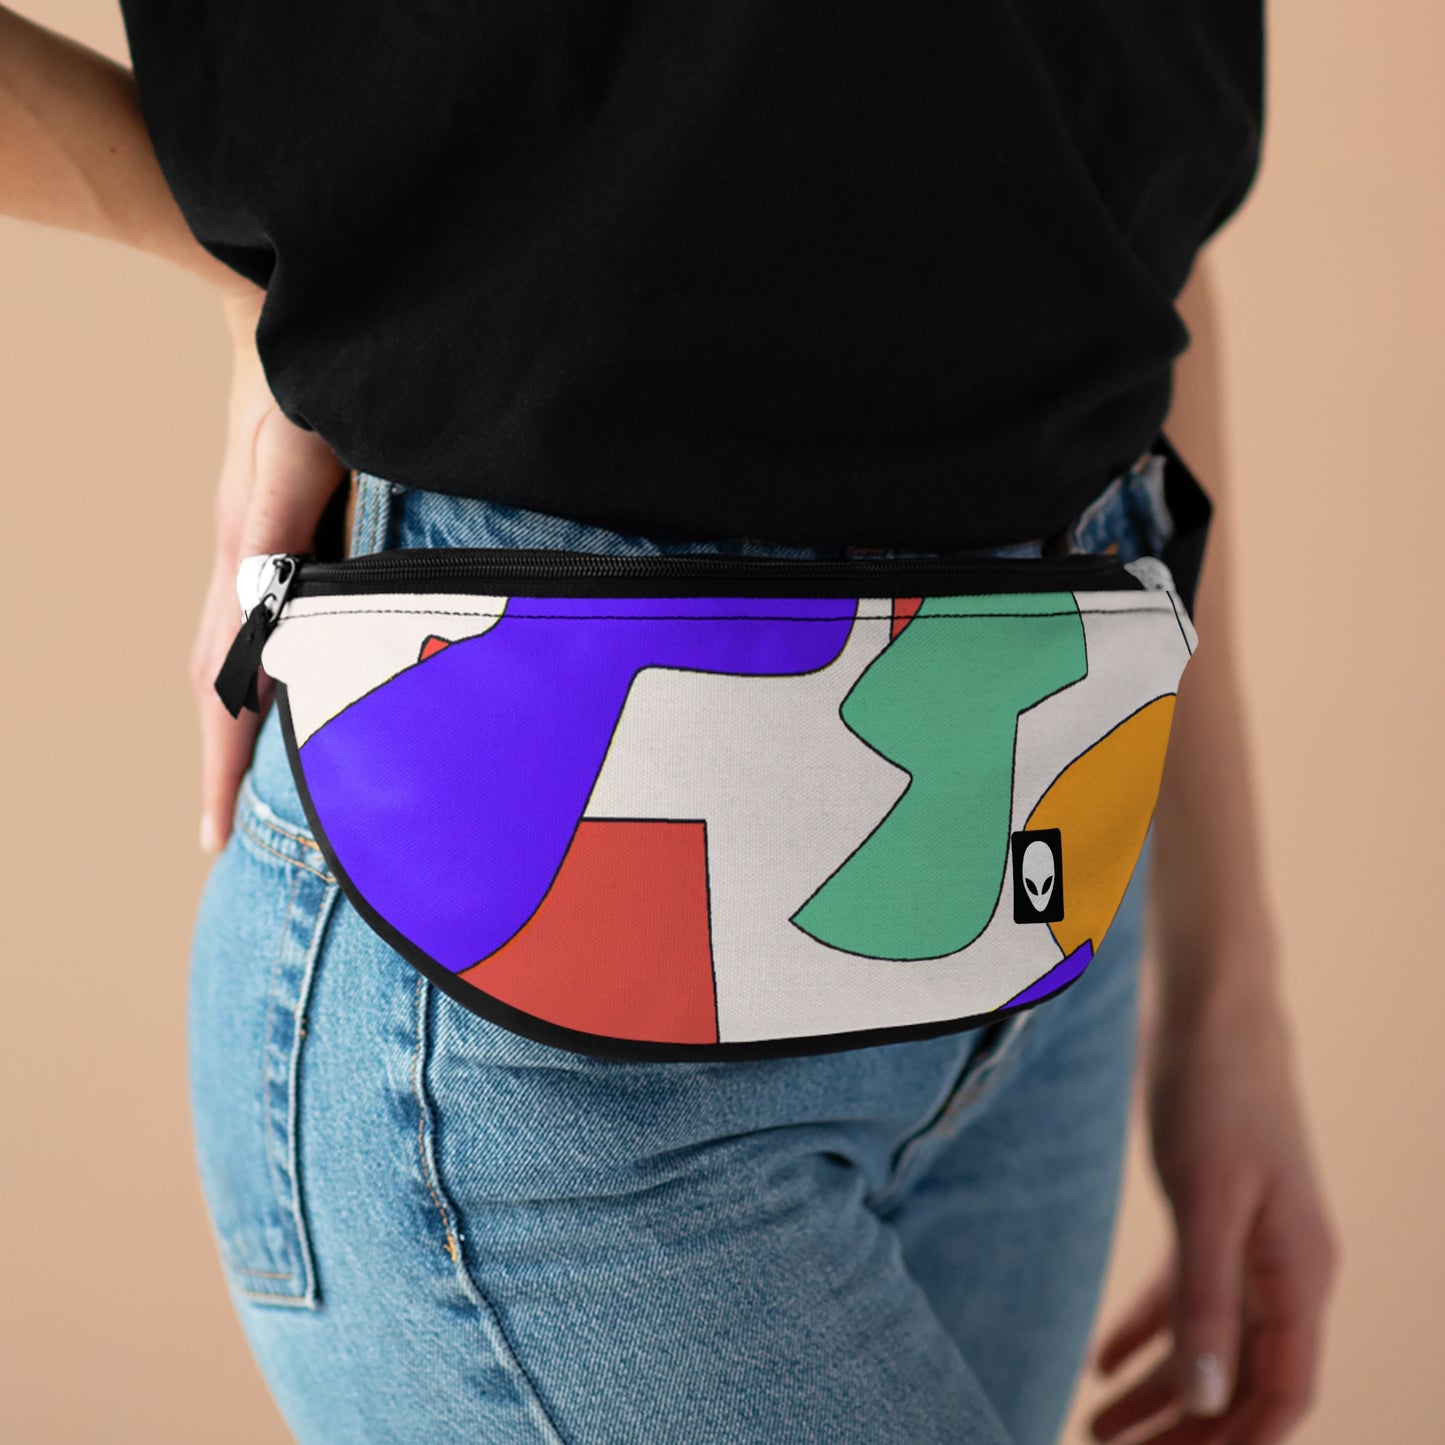 "A Beacon of Hope"- The Alien Fanny Pack